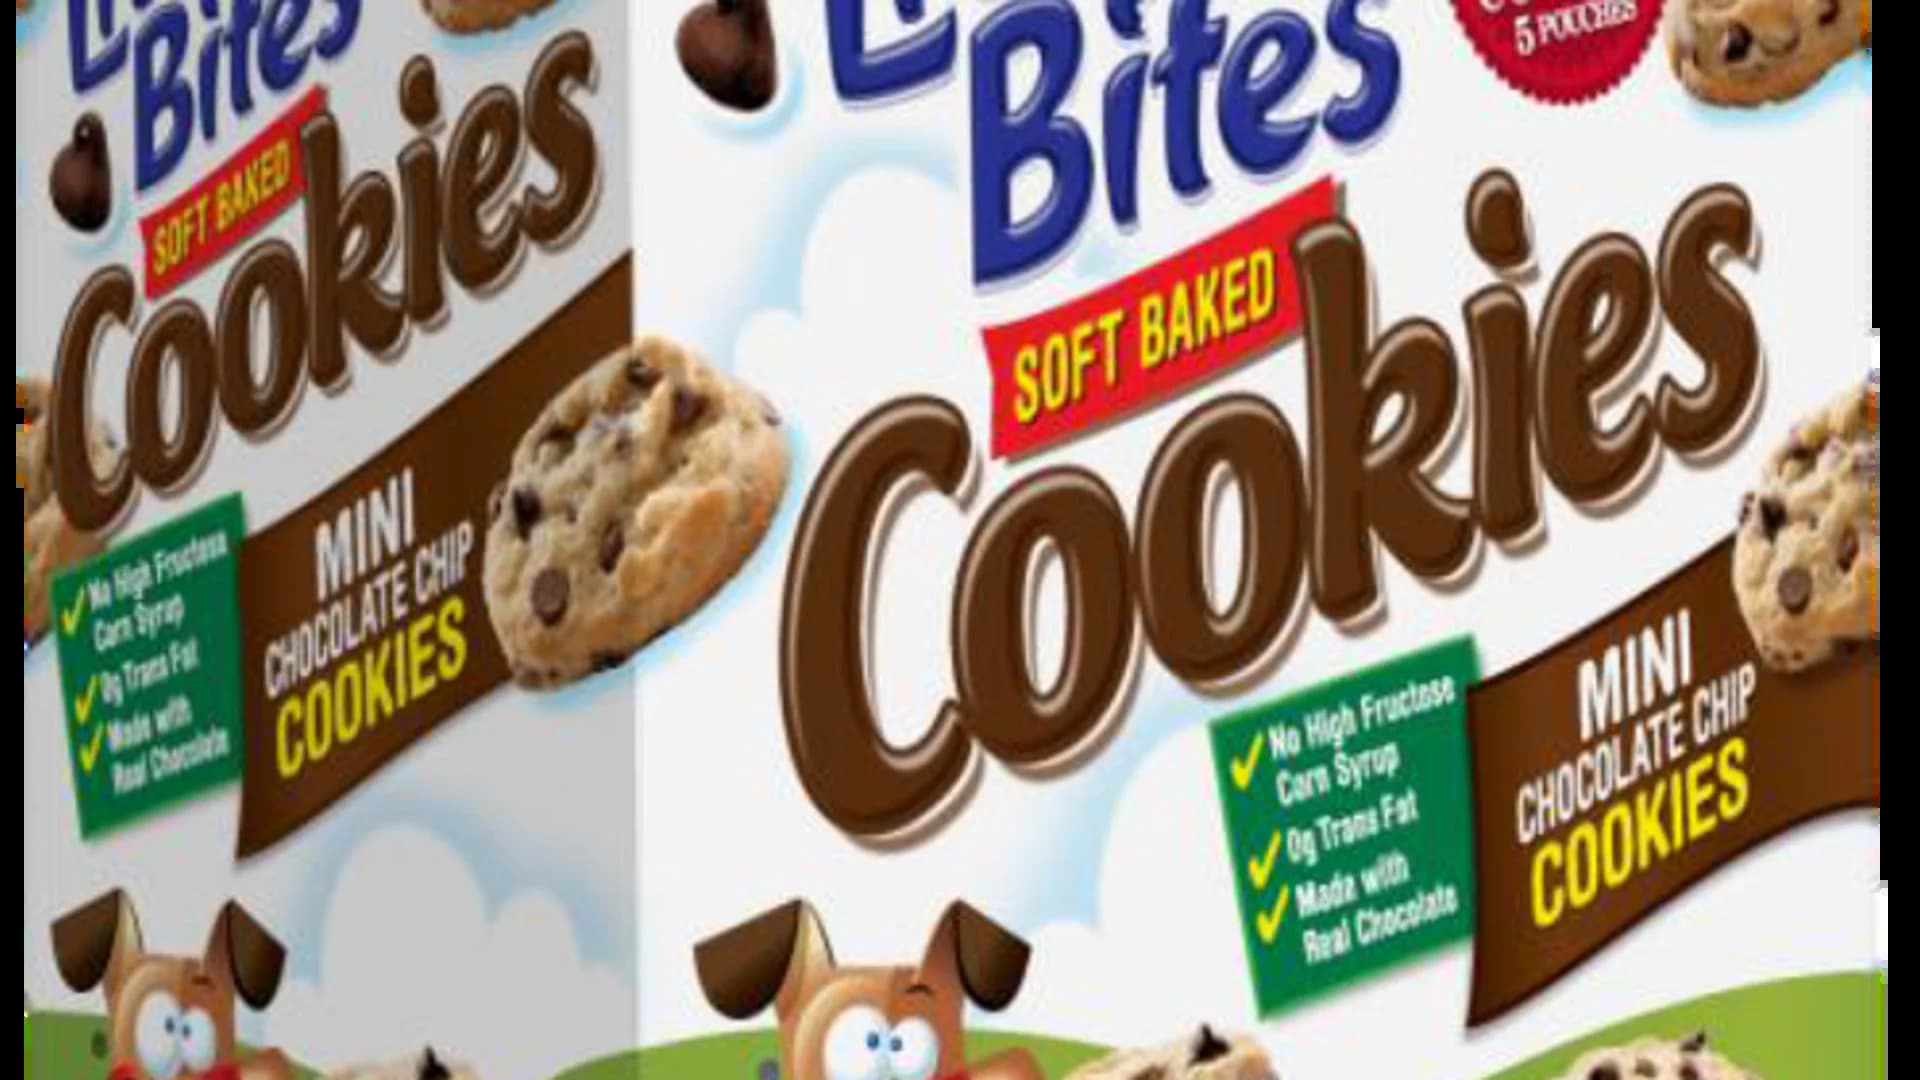 FDA: Entenmann's Little Bites Chocolate Chip Cookies recalled due to presence of plastic